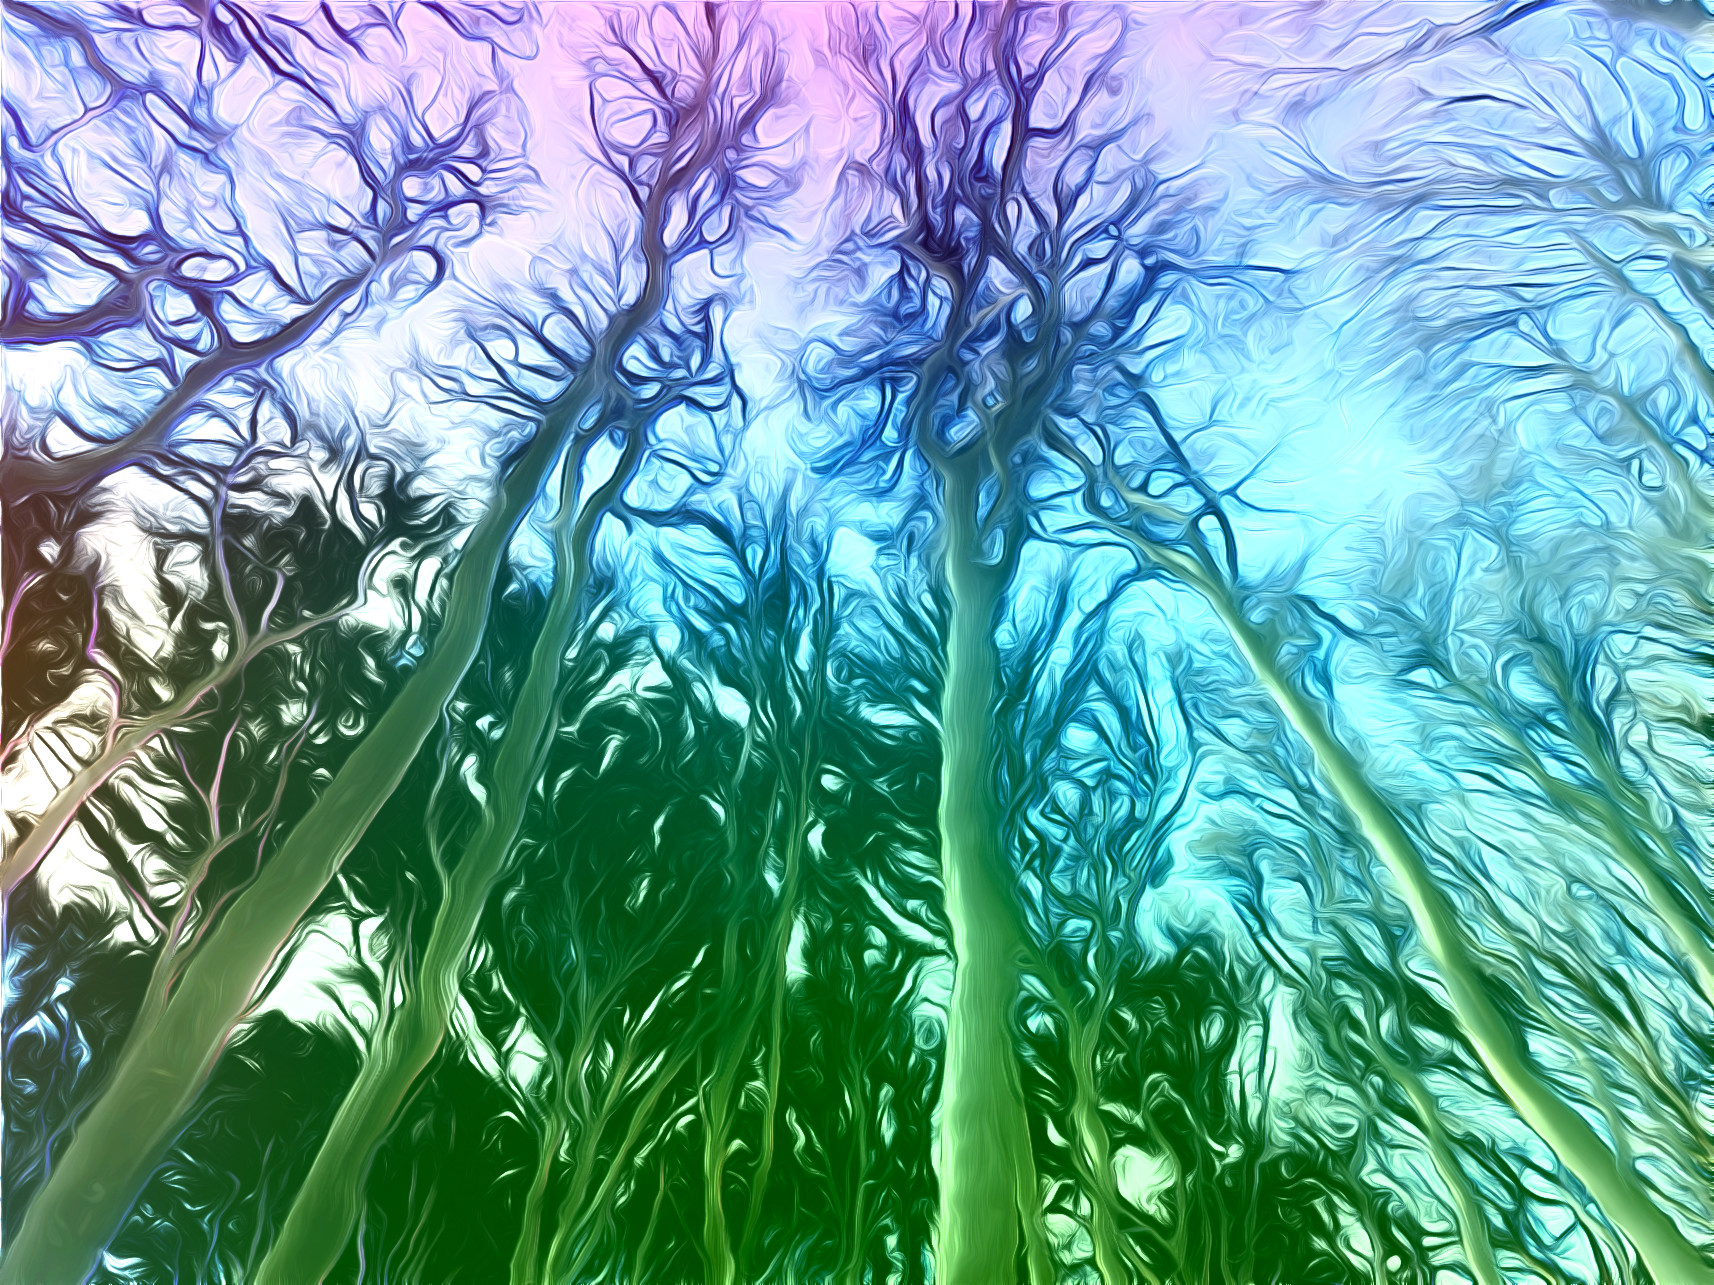 2021-05-24 08-18-59 landscape-tree-nature-forest-branch-snow-766978-pxhere with JVID effect A (DreamSmooth+Barbouillage).jpg